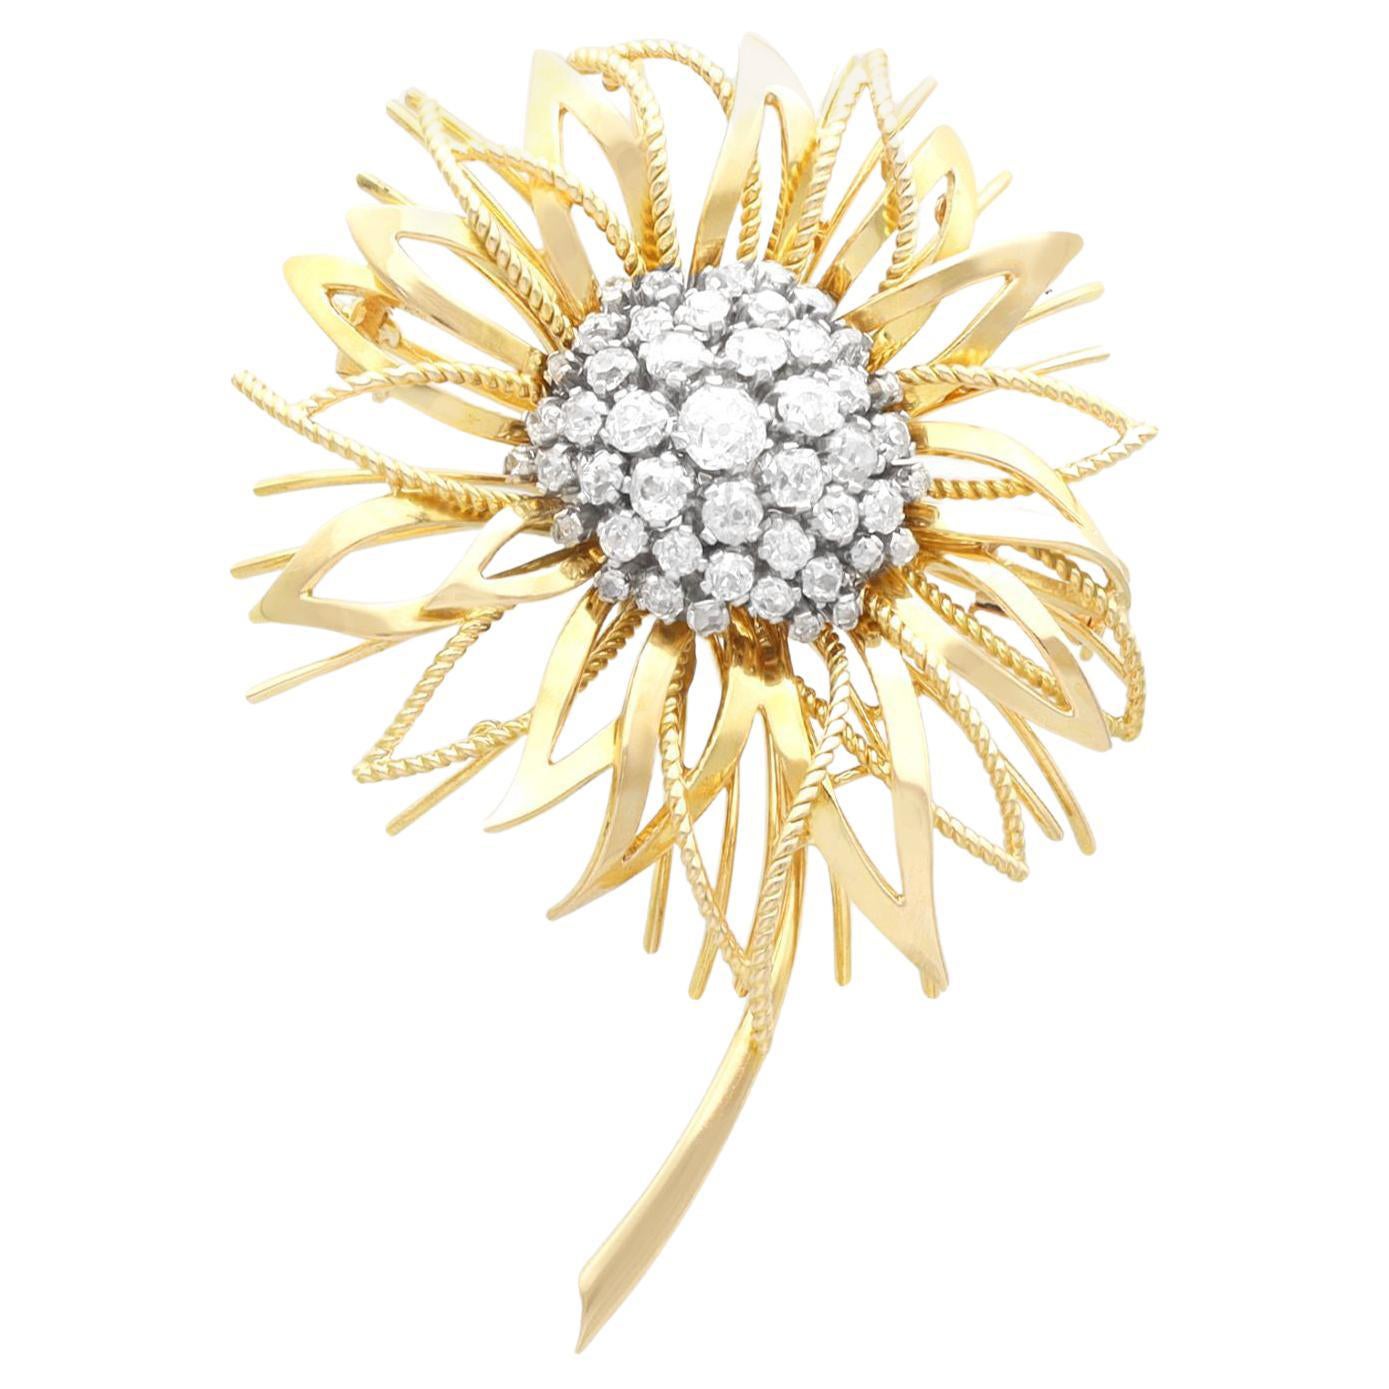 Vintage French 2.89 Carat Diamond and Yellow Gold Flower Brooch, circa 1950 For Sale